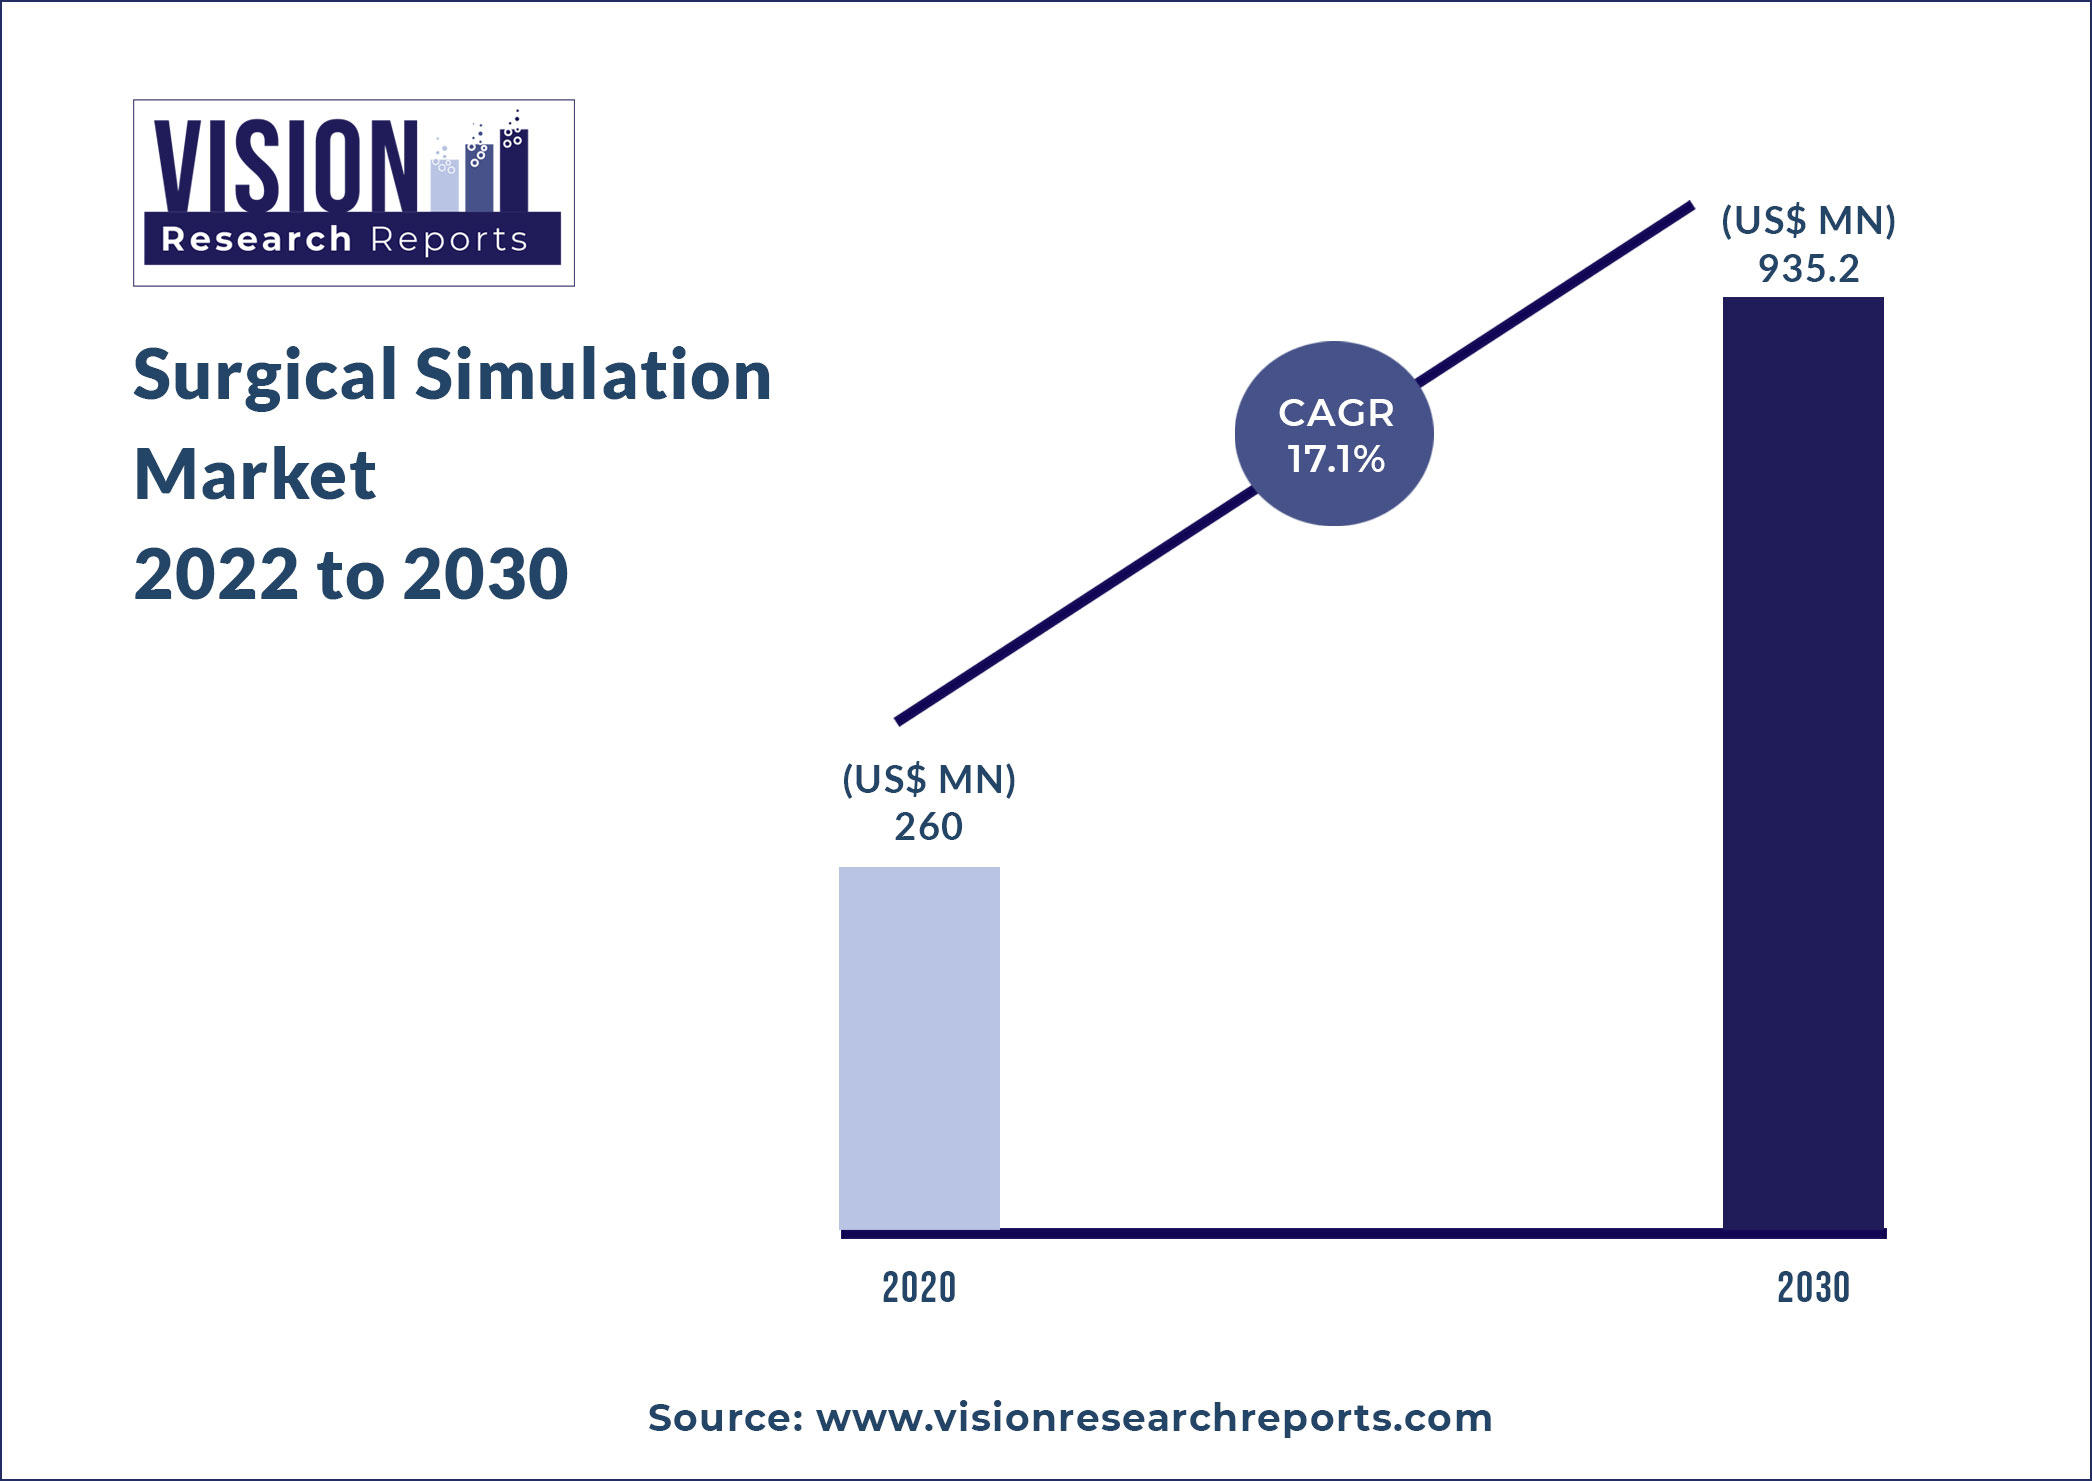 Surgical Simulation Market Size 2022 to 2030